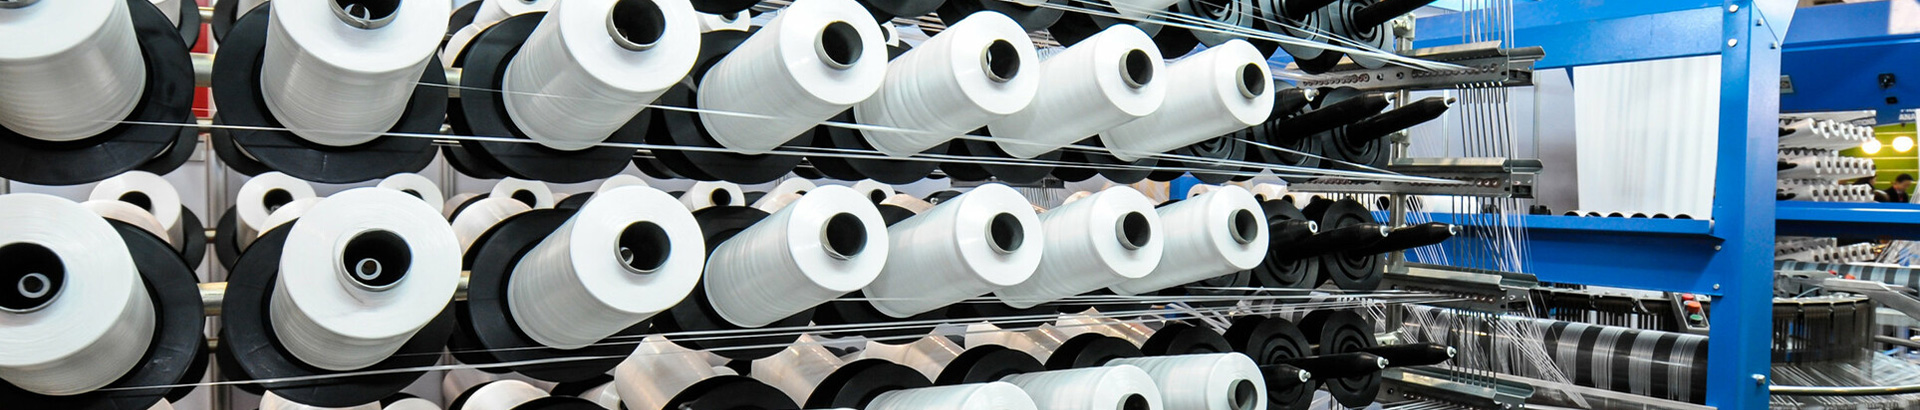 What are the Classifications of Textile Machinery?